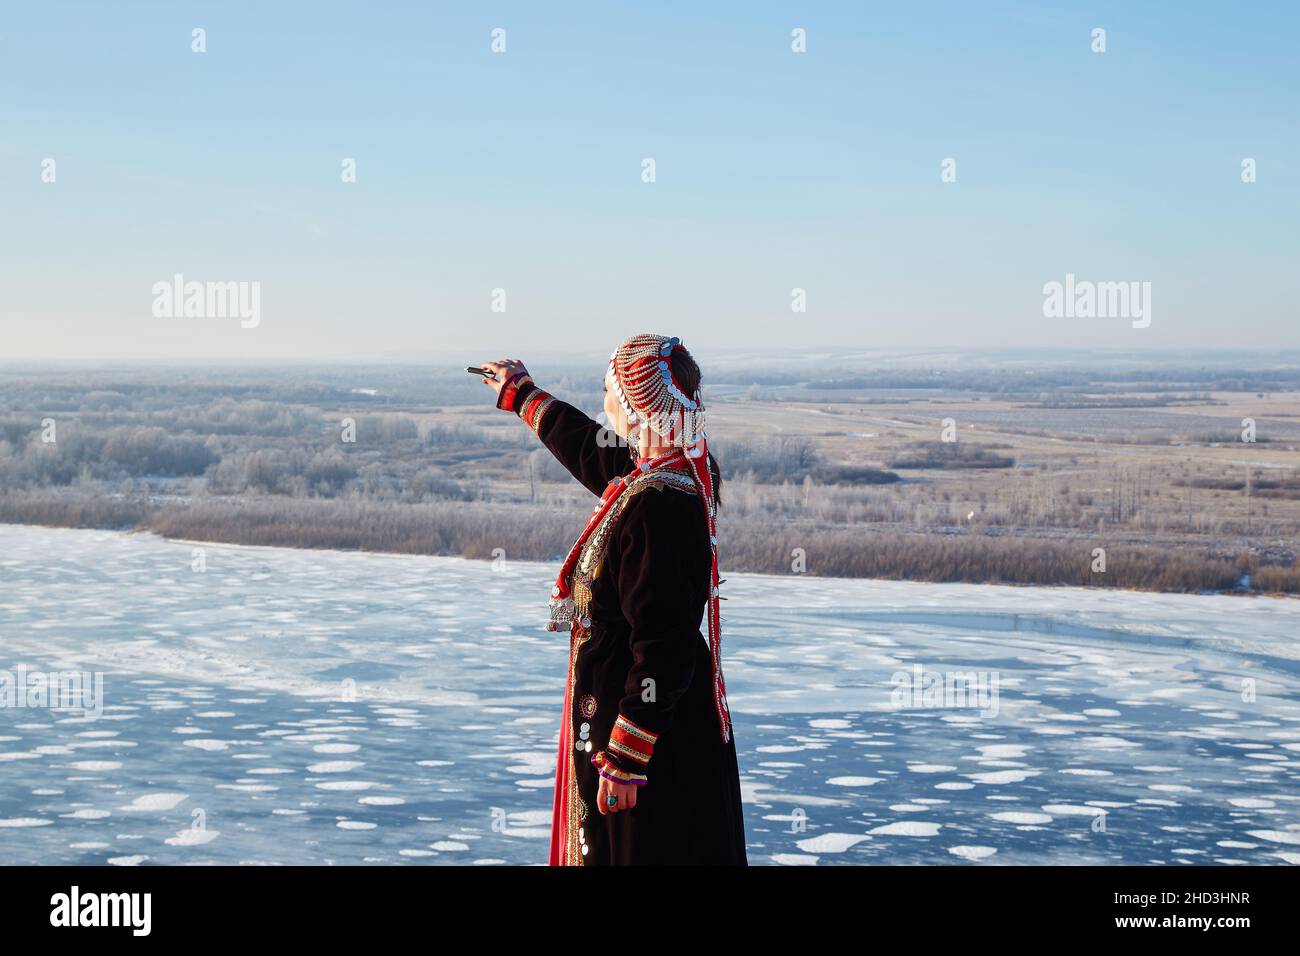 A young woman stands on the edge of a cliff with an outstretched hand with a jew's harp in winter dressed in a national Bashkir costume. Stock Photo